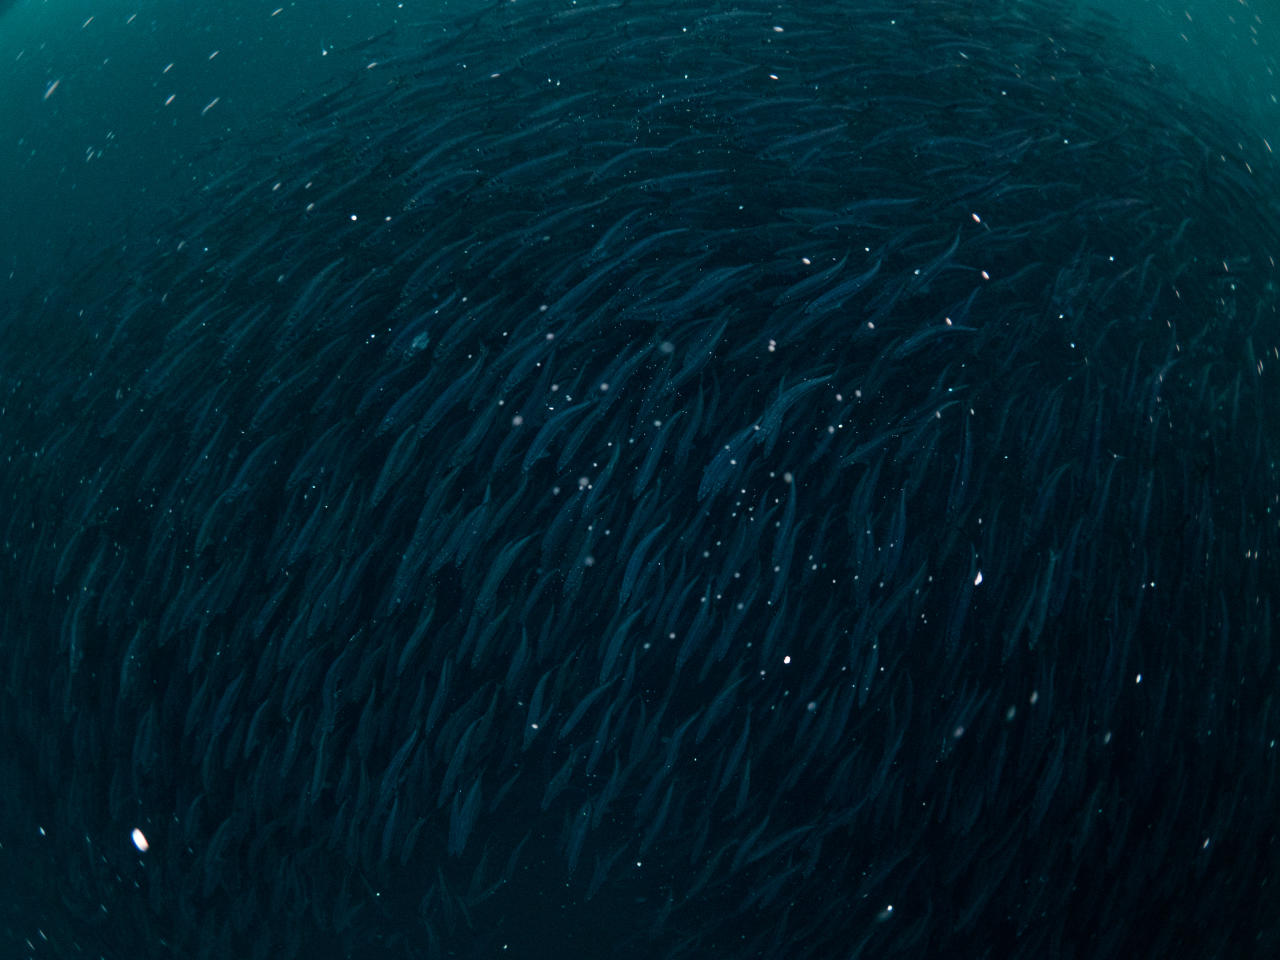 School of herring trying to escape